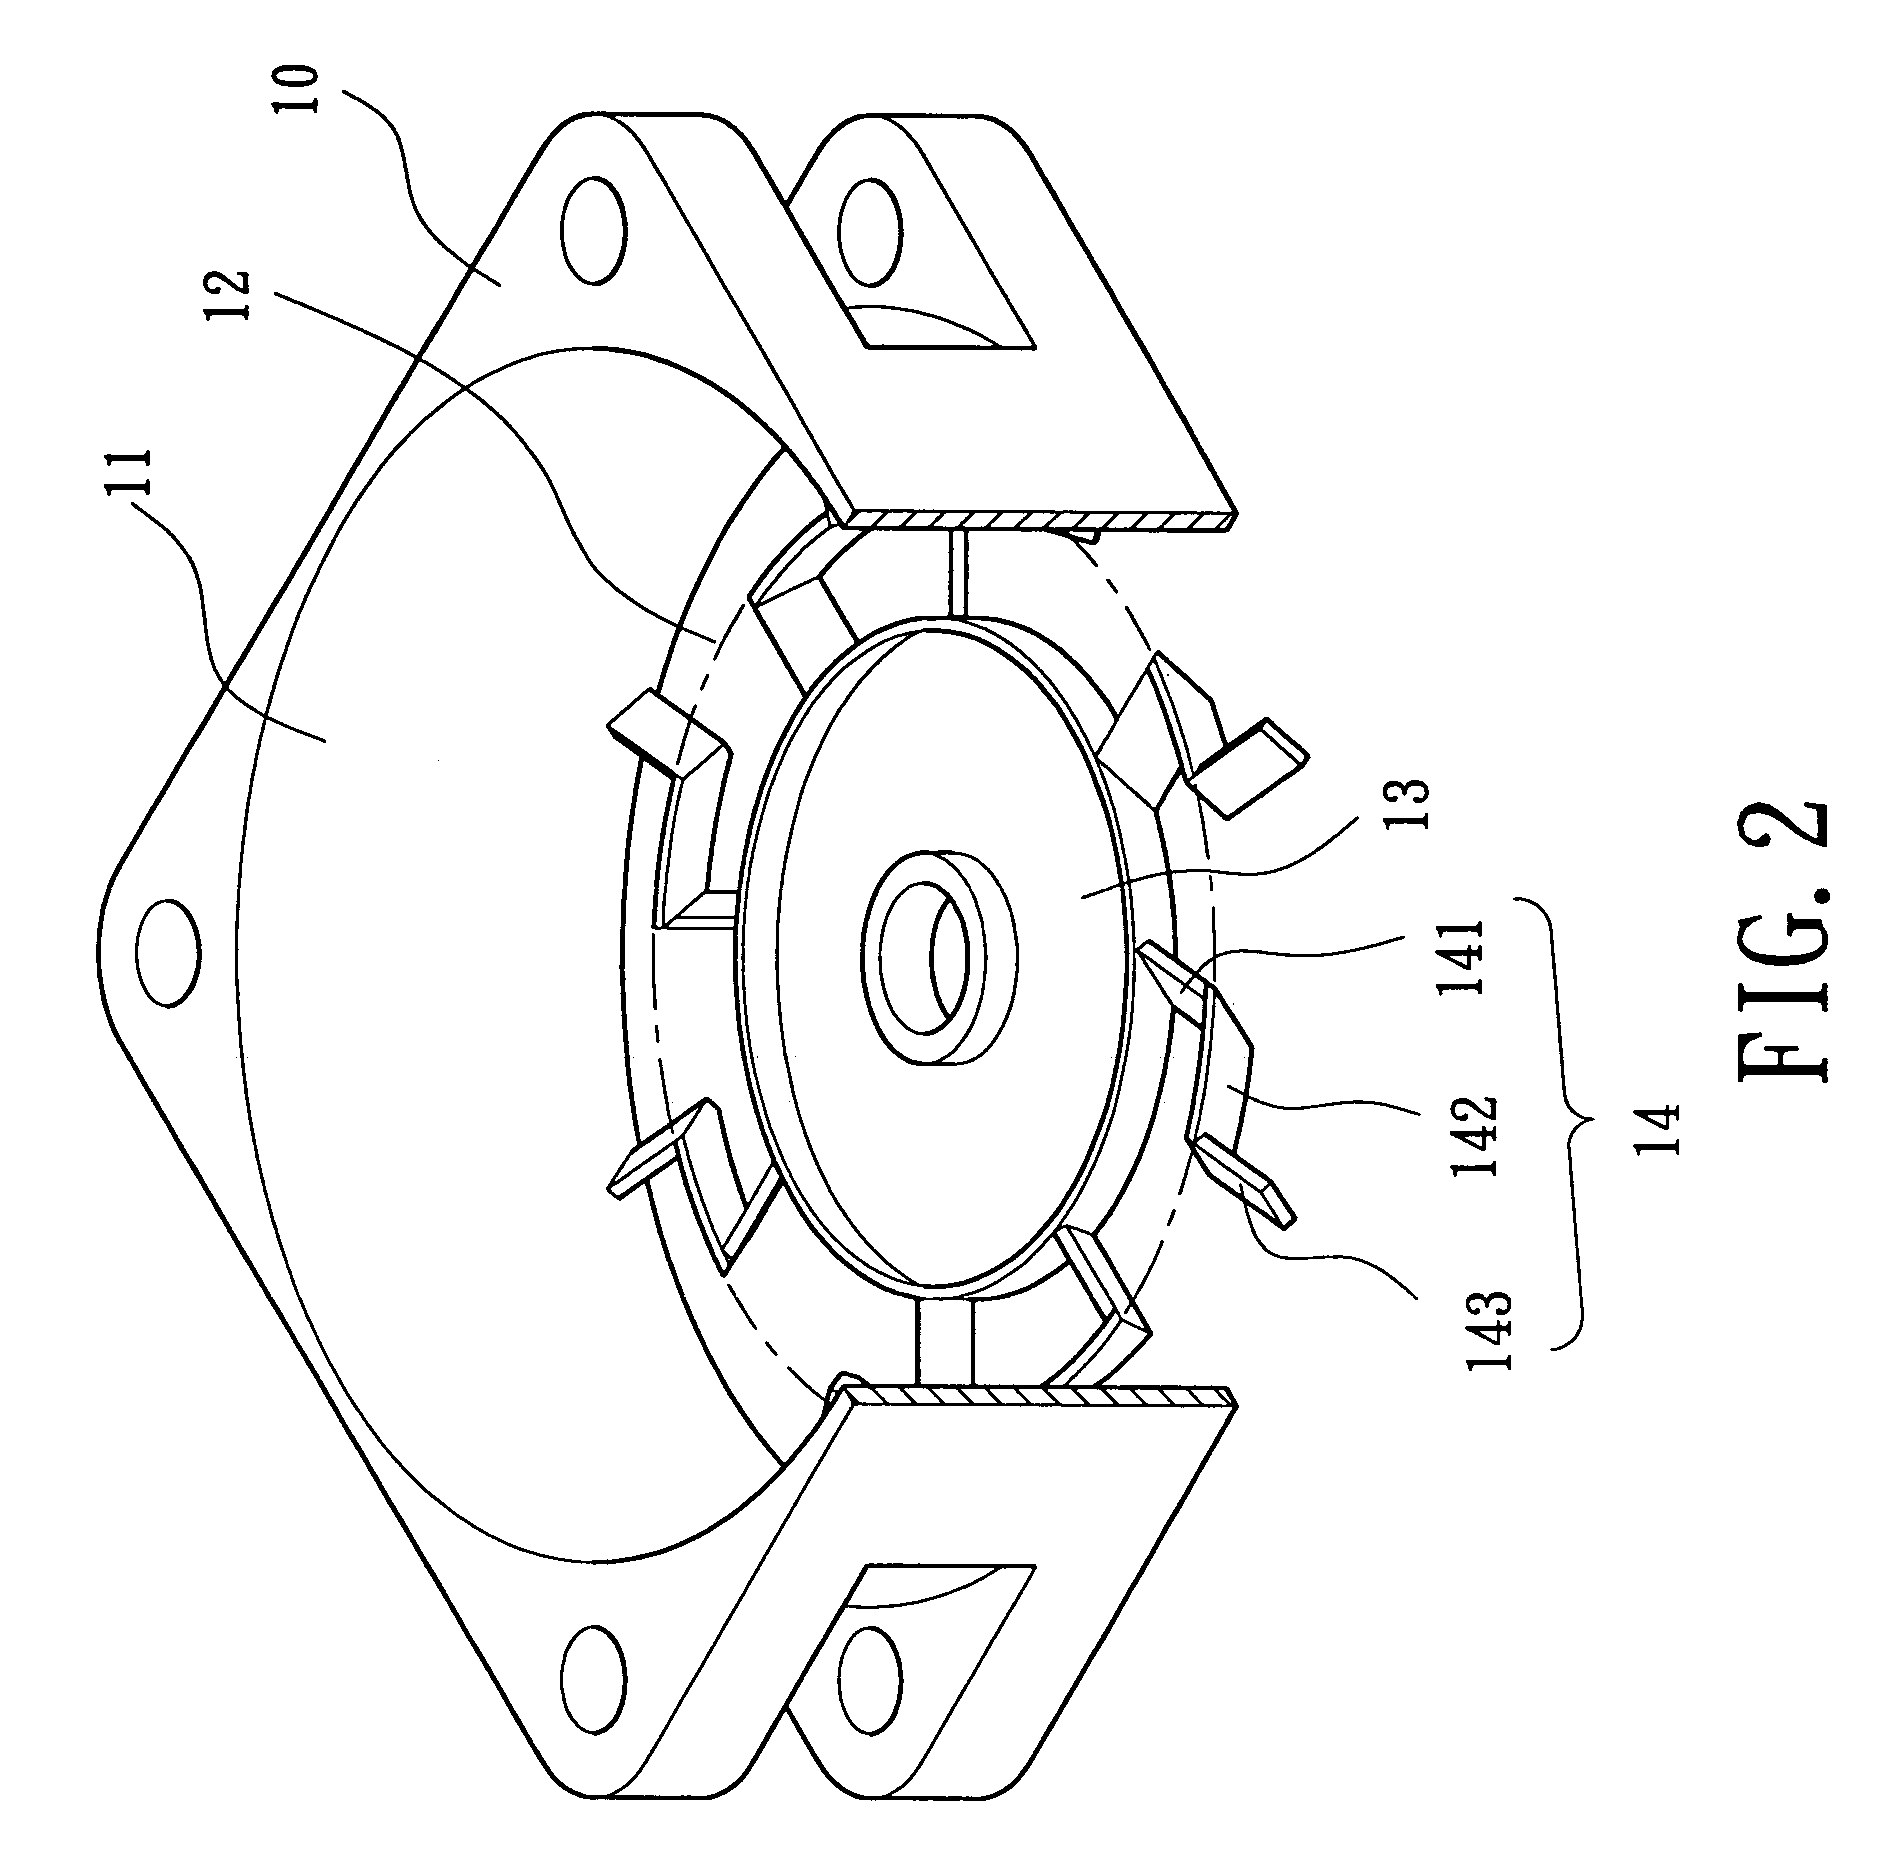 Airflow guiding structure for a heat-dissipating fan